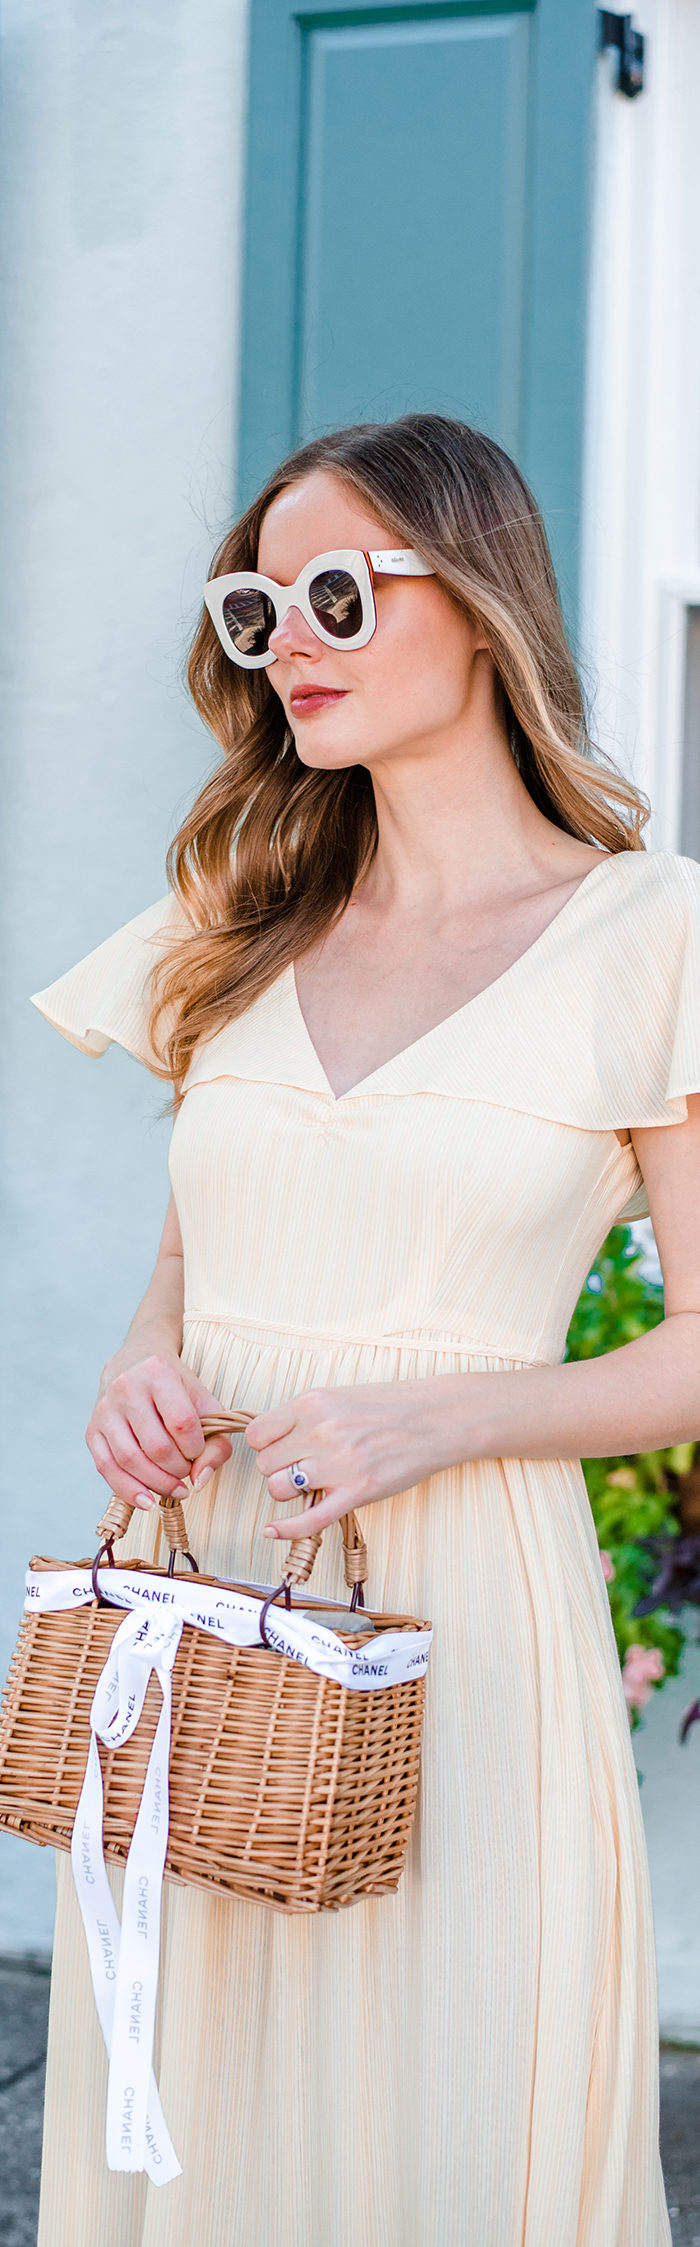 Alyssa Campanella of The A List blog's 48 Hours in Charleston itinerary wearing Christy Dawn Monarch dress in yellow